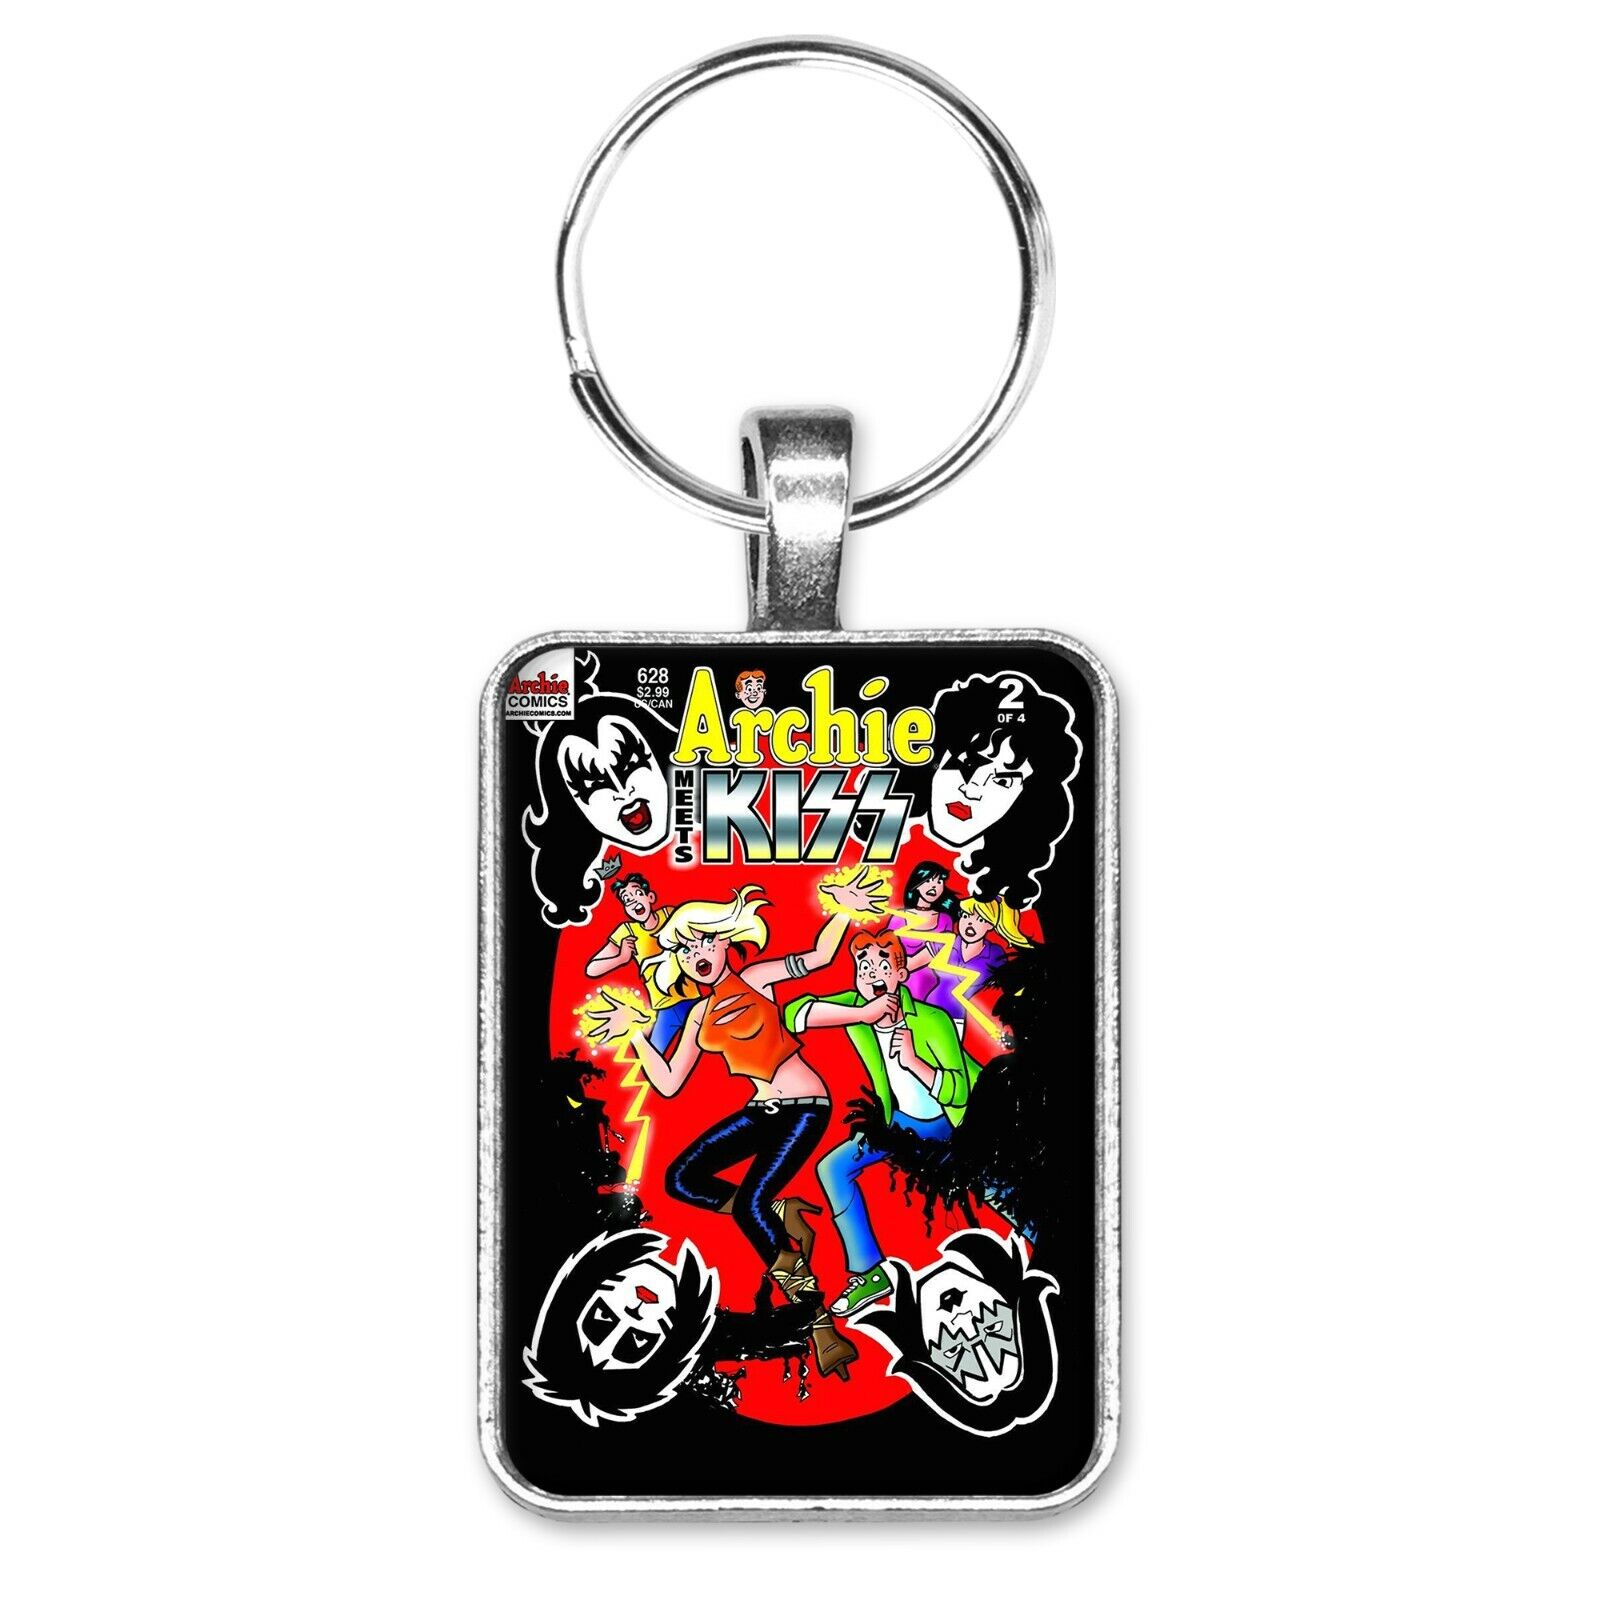 Archie Meets KISS #628 Cover Key Ring or Necklace Betty Veronica Jughead Sabrina